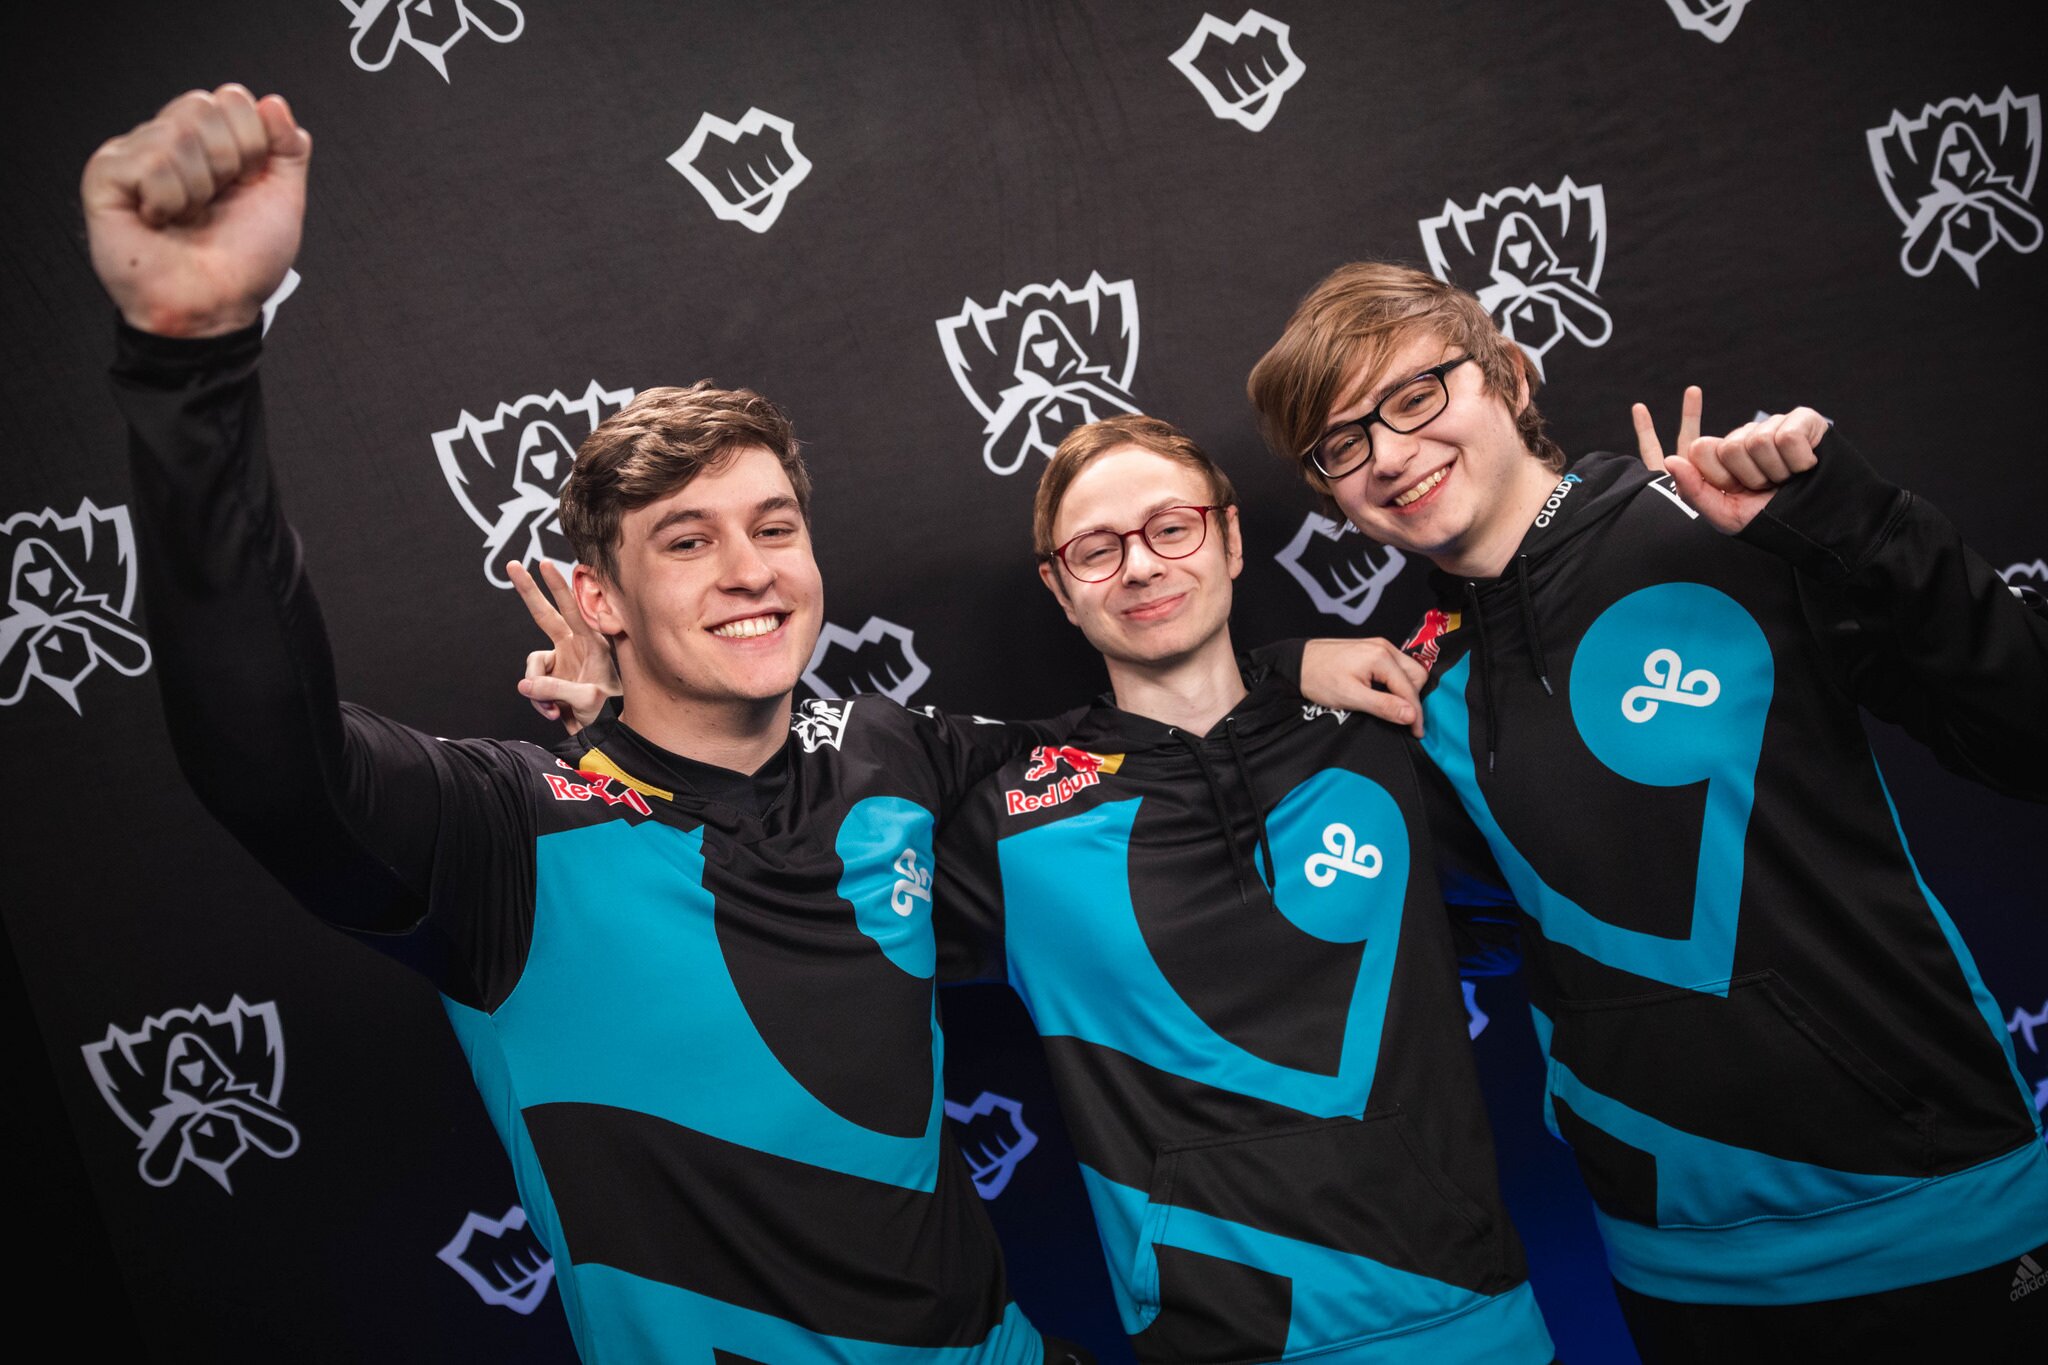 With Cloud 9 and Fnatic emerging victorious during the second day of quarterfinals, the finals will have at least on western representative.